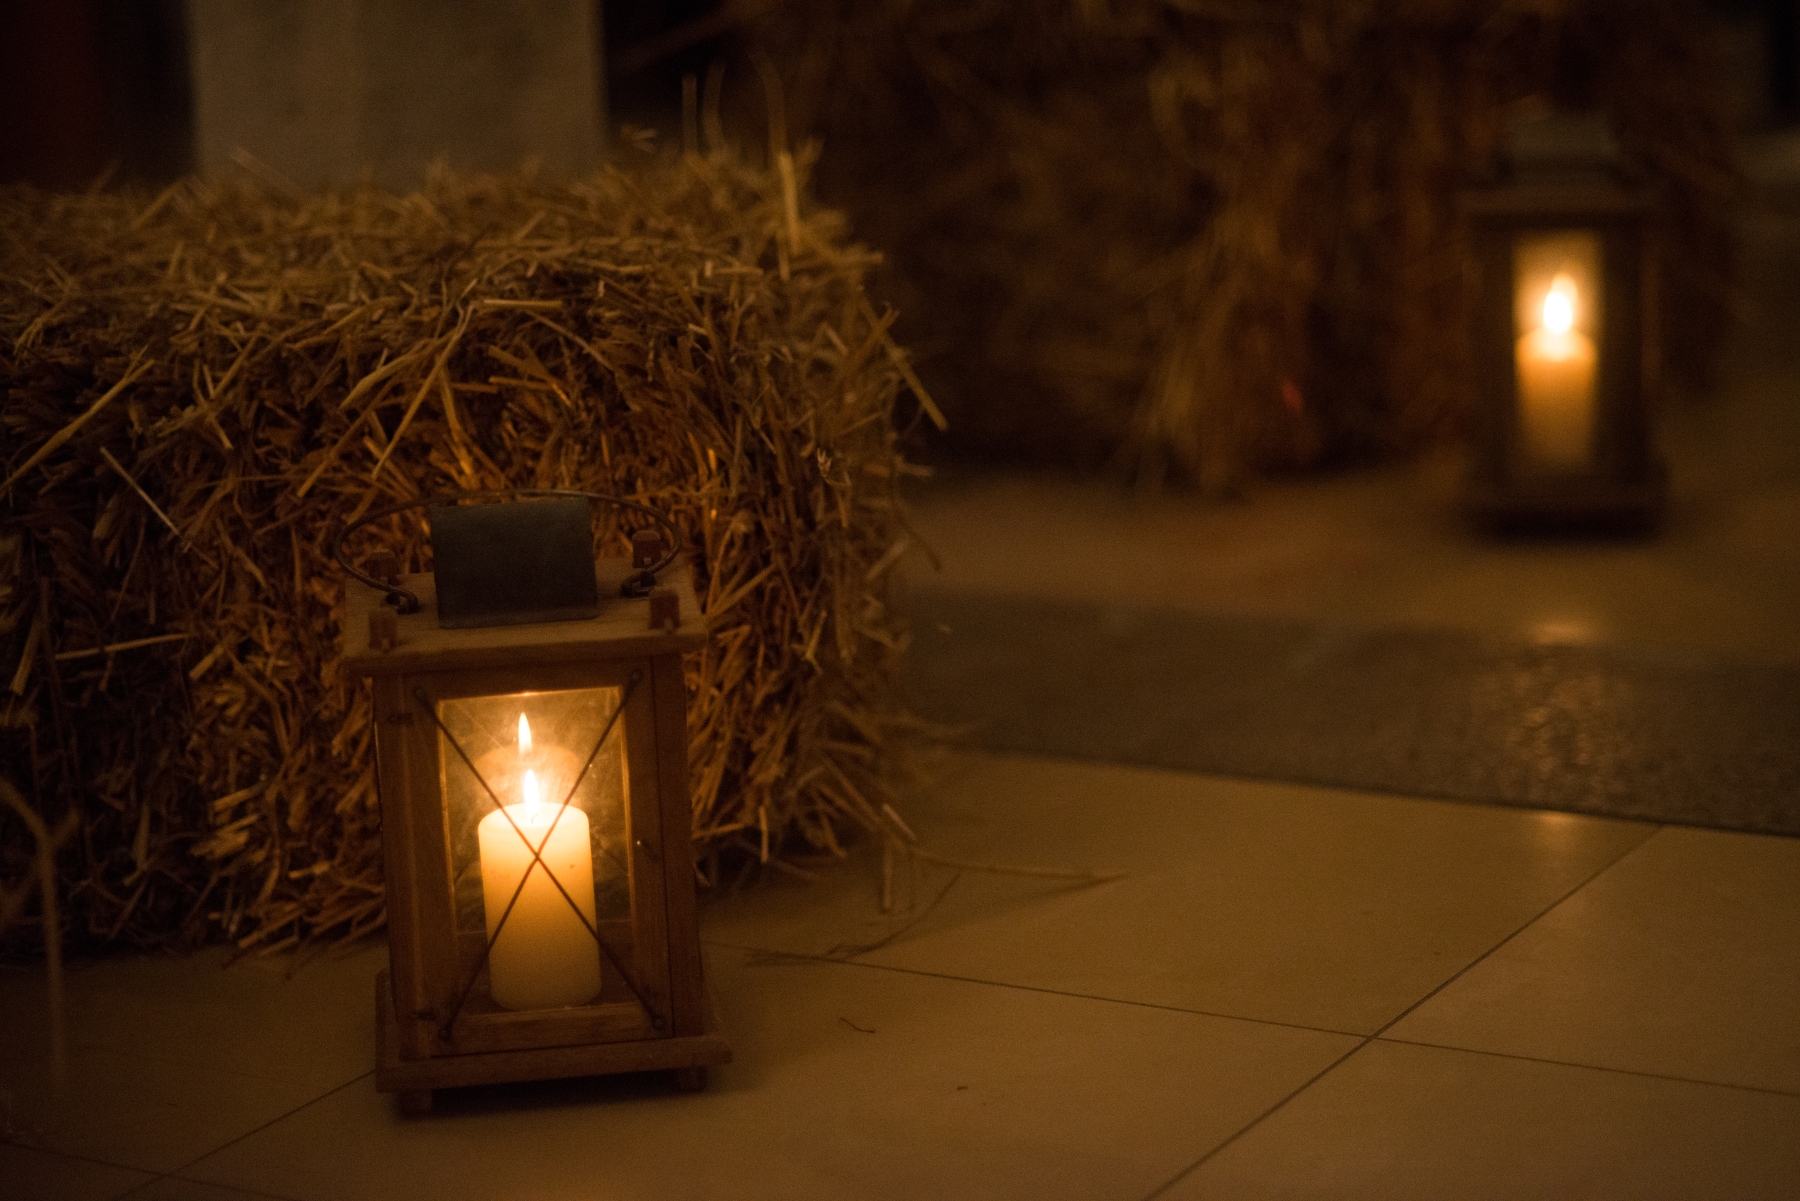 Romantic_close_up_with_candles_bales_of_straw_inside_historic_masonry_by_studioblom.de_